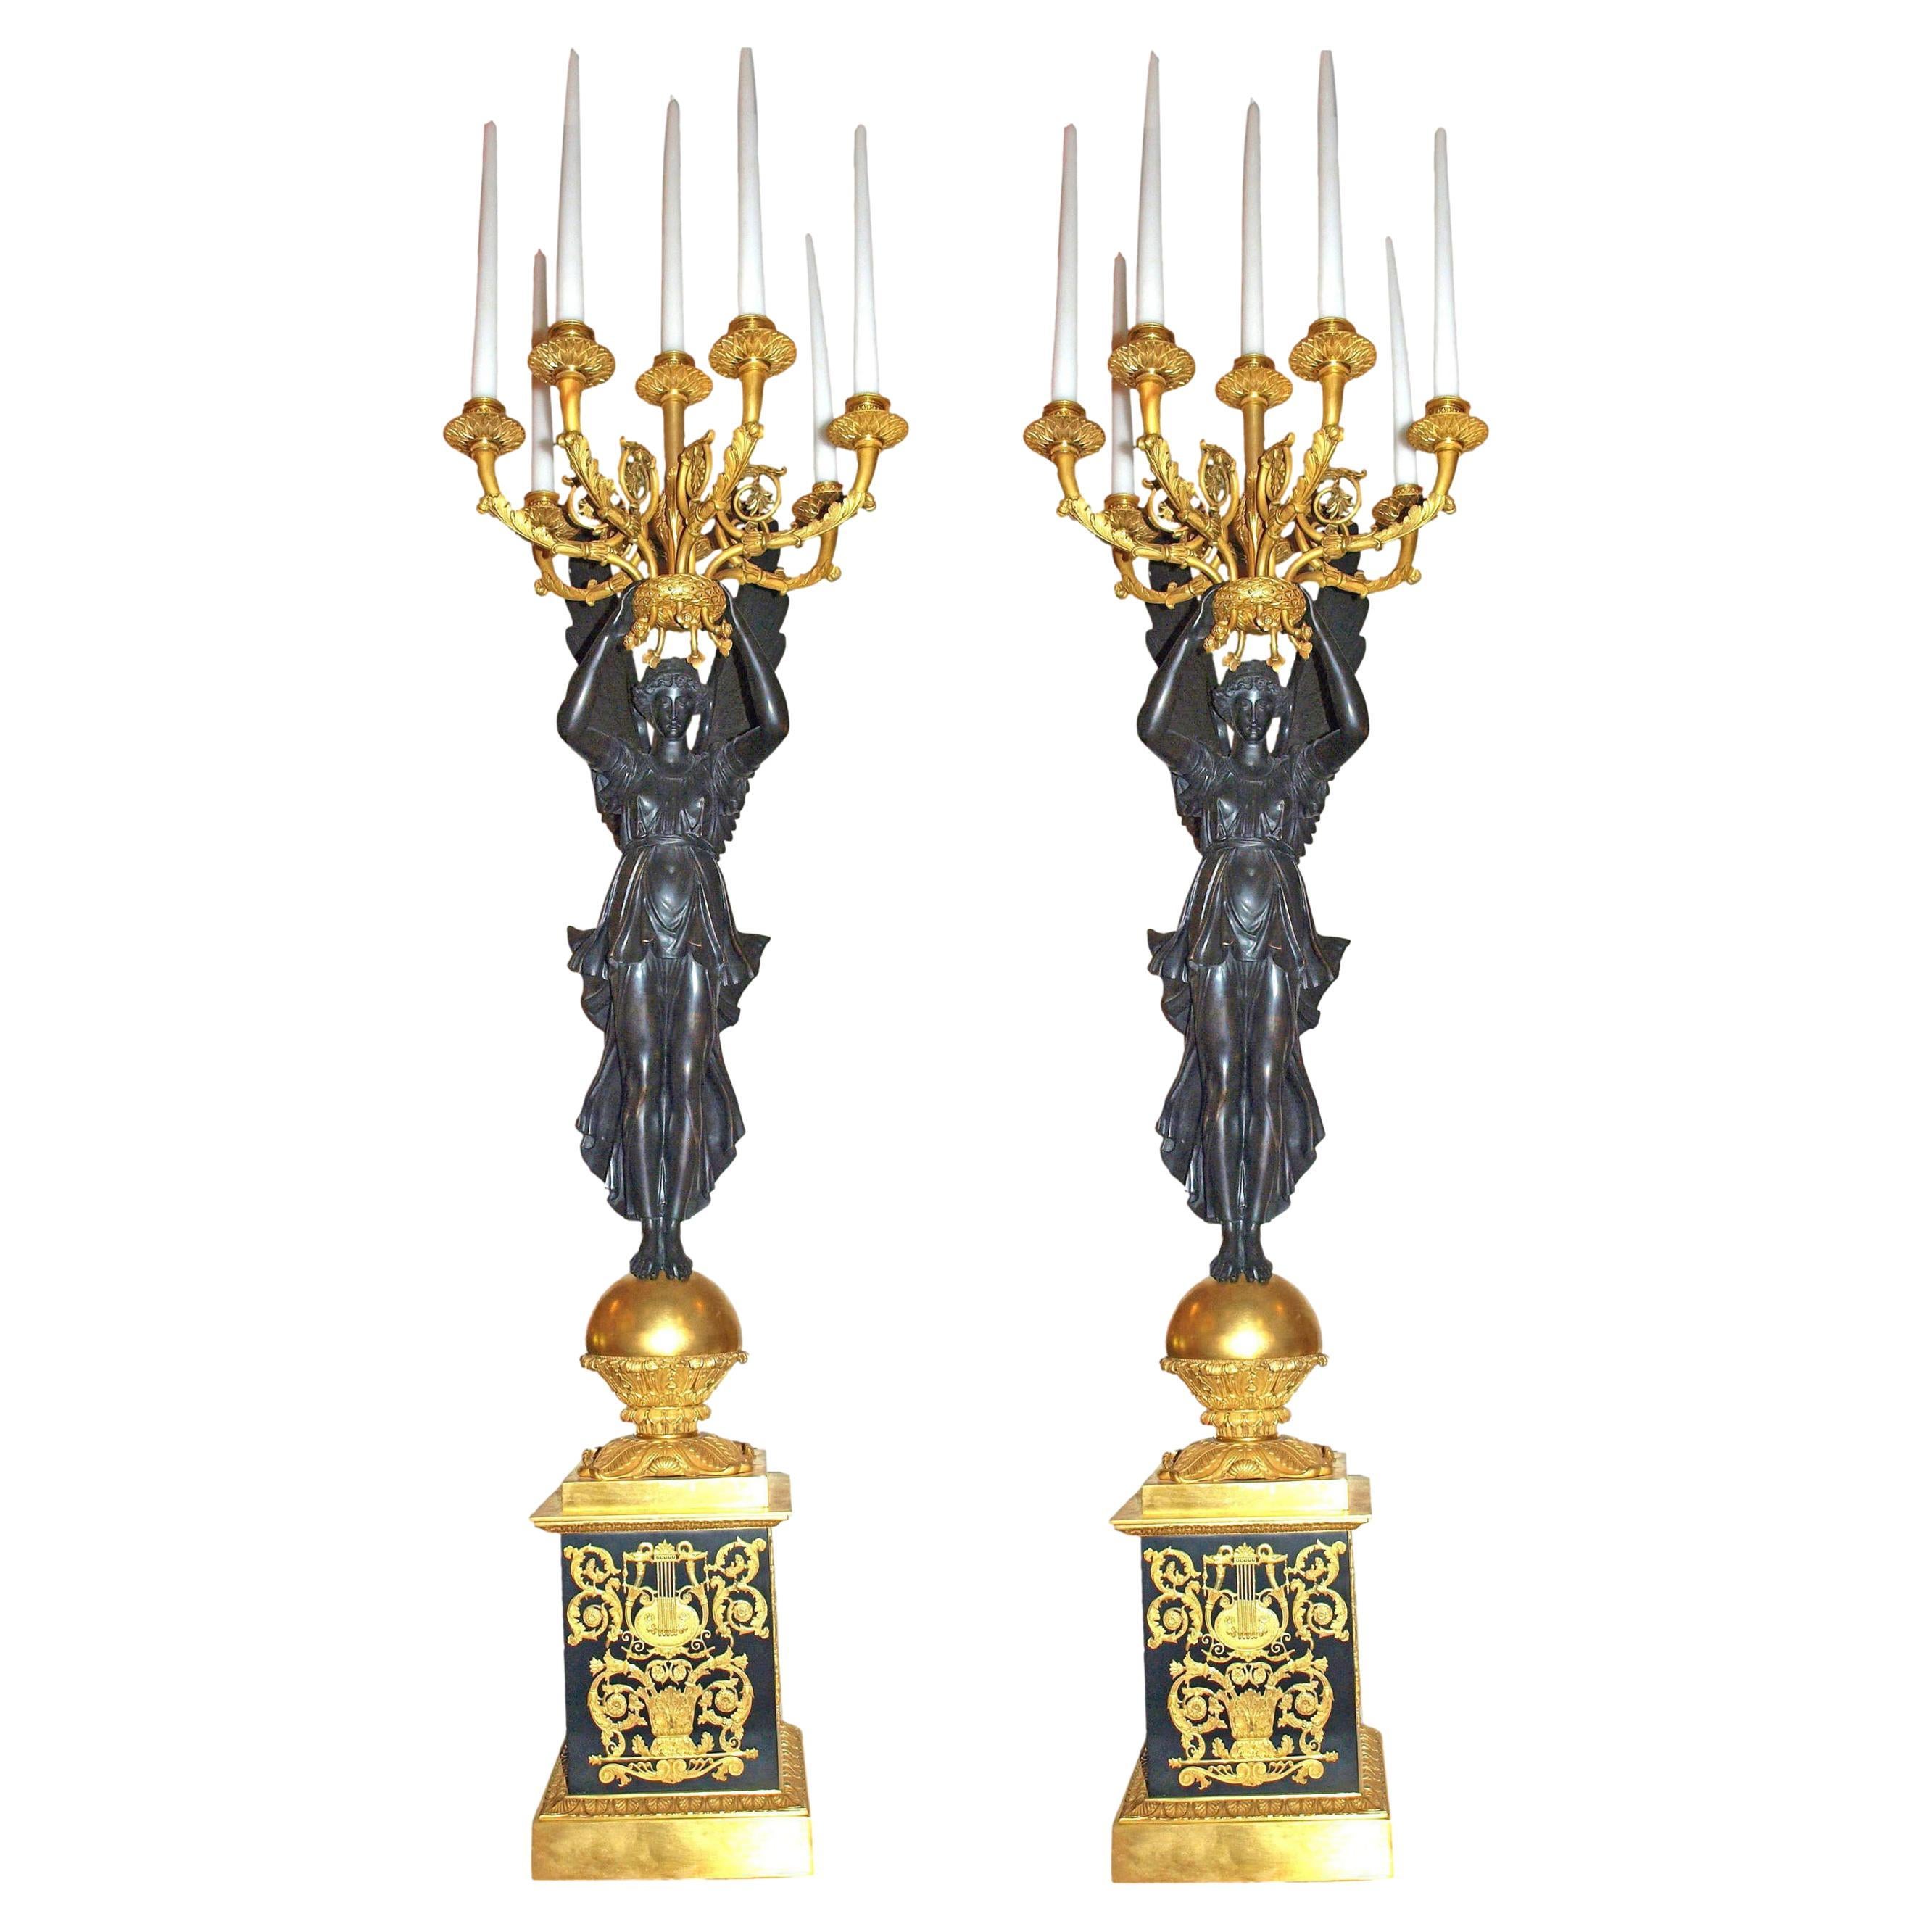 Magnificent Pair of Gilt Bronze with Patinated Bronze Empire Style Candelabra